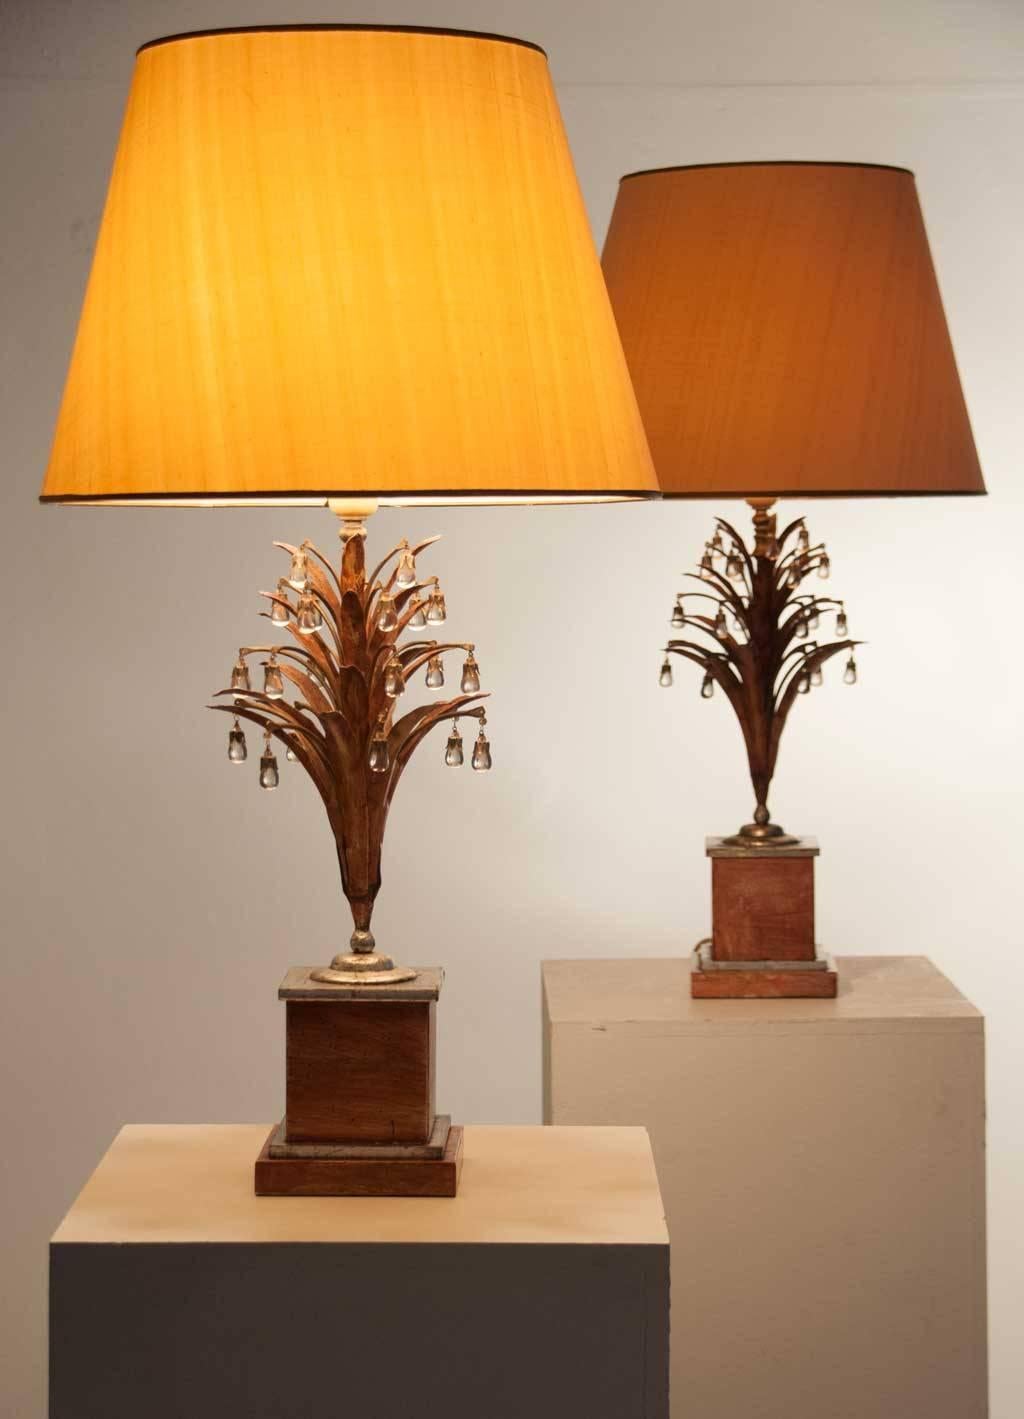 Rare table lamps attributed to Banci. Massive polychrome and silver plated stand with tree-like stem. Hanging from the 'leaves' beautiful mountain crystal drops. Quite majestic table lamps. 
Measurements below are without the lampshade. Height with